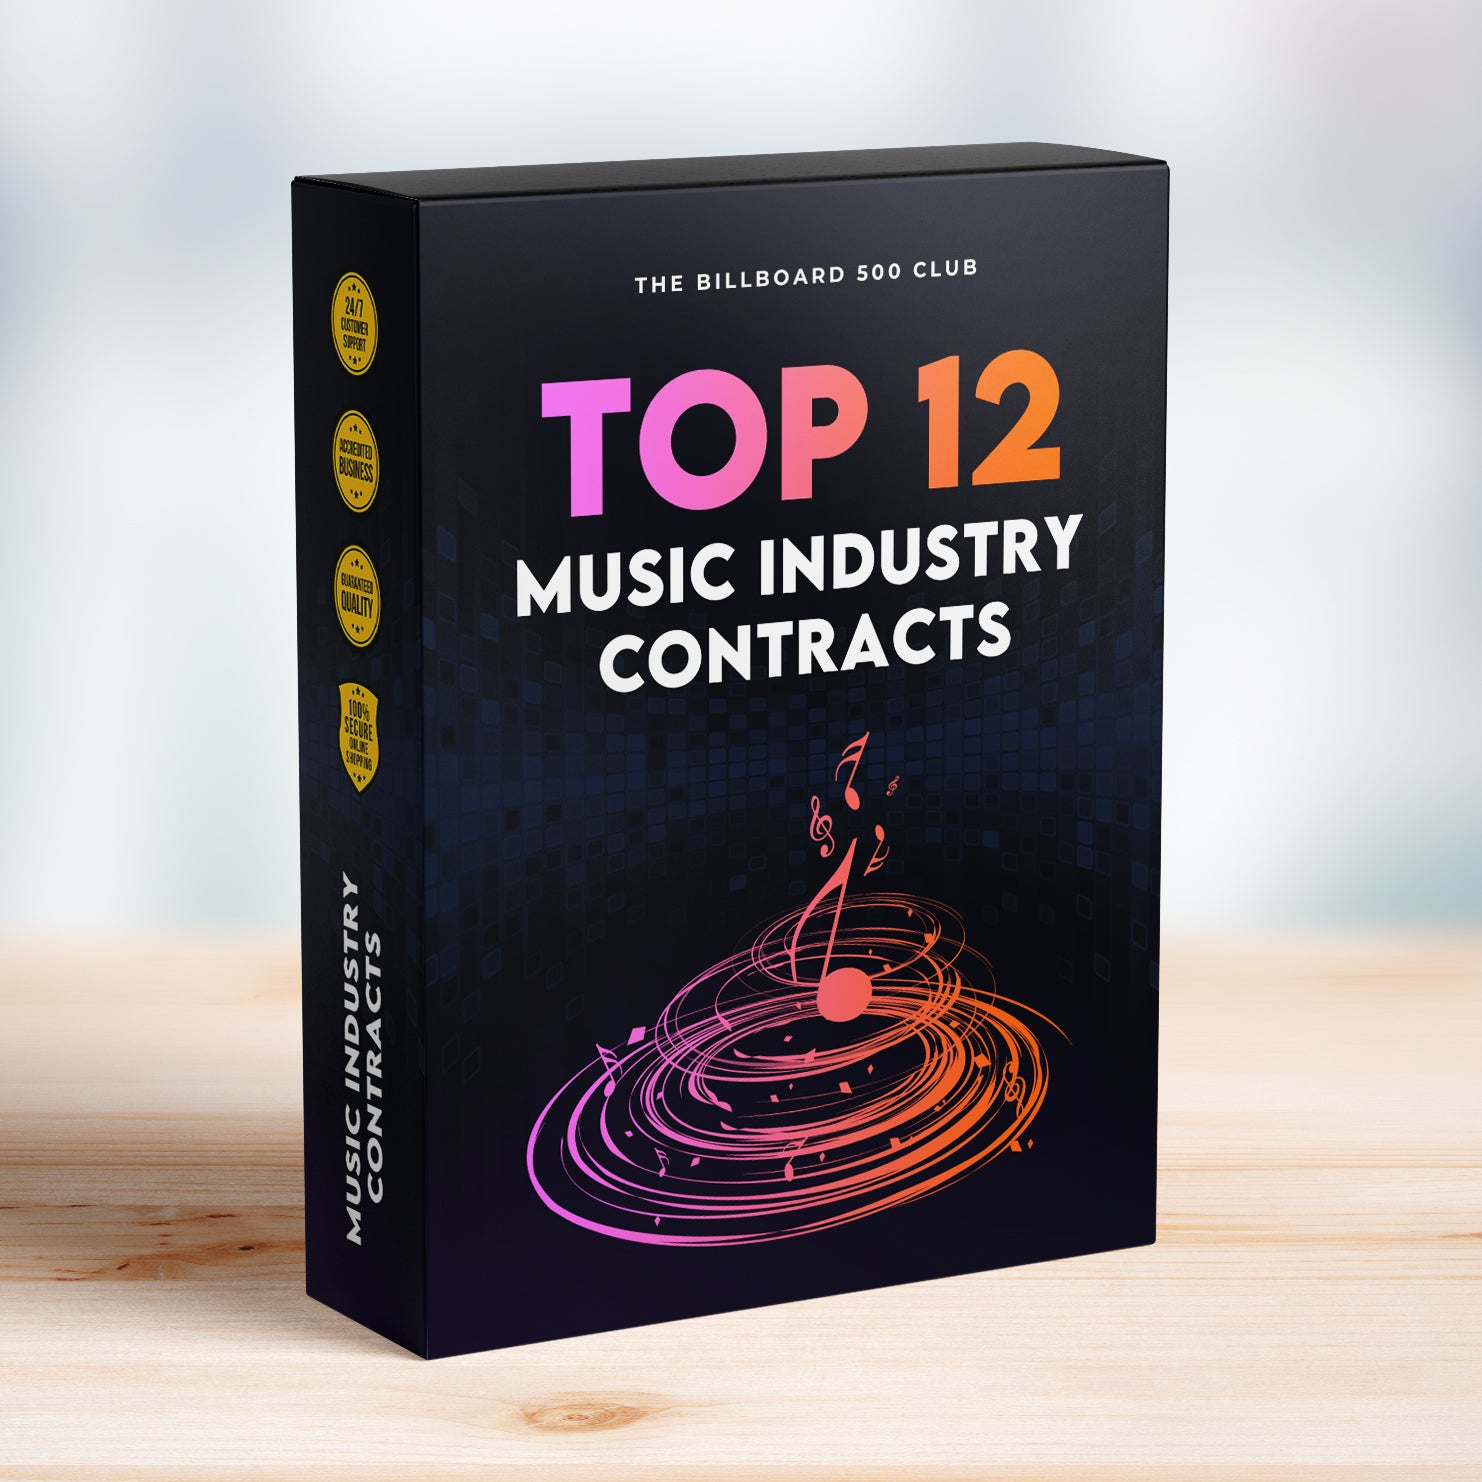 Top 12 Music Industry Contracts - The Billboard 500 Club